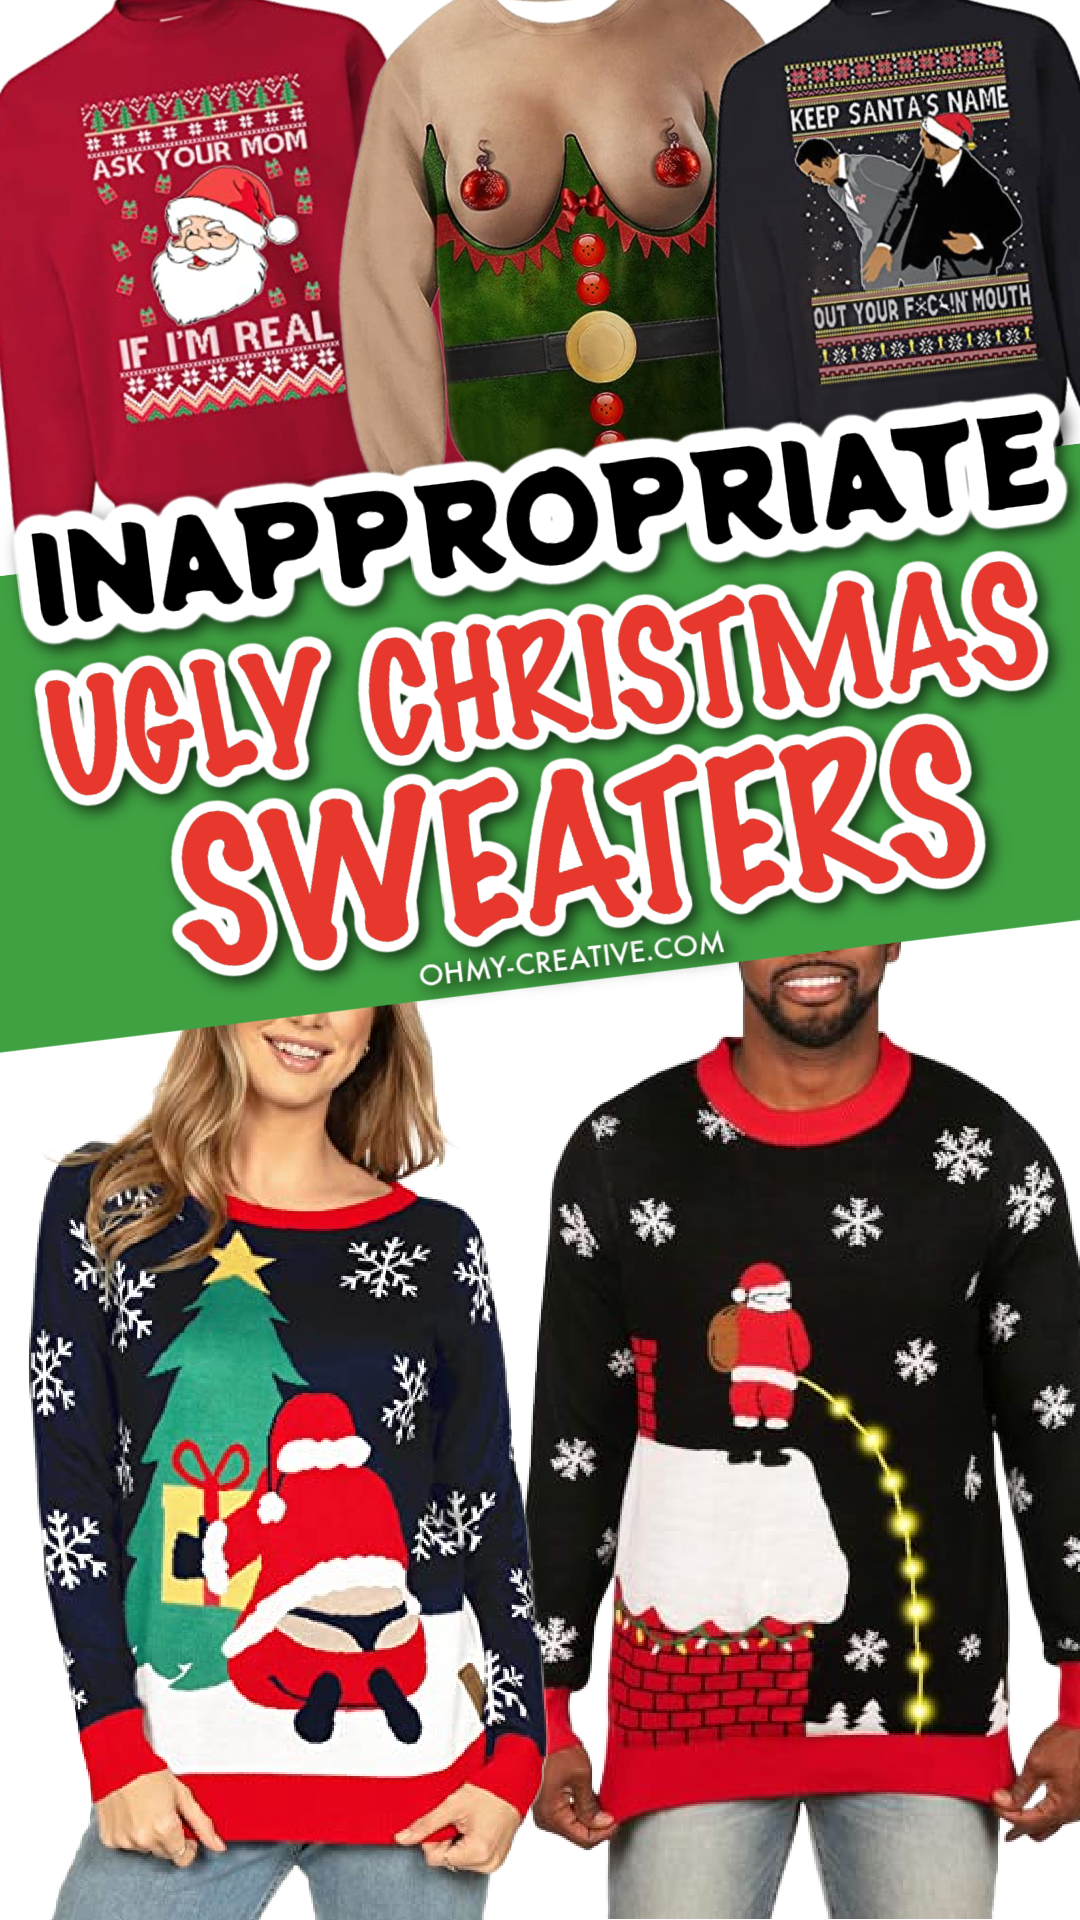 a collage of men's and women's inappropriate Christmas sweaters.